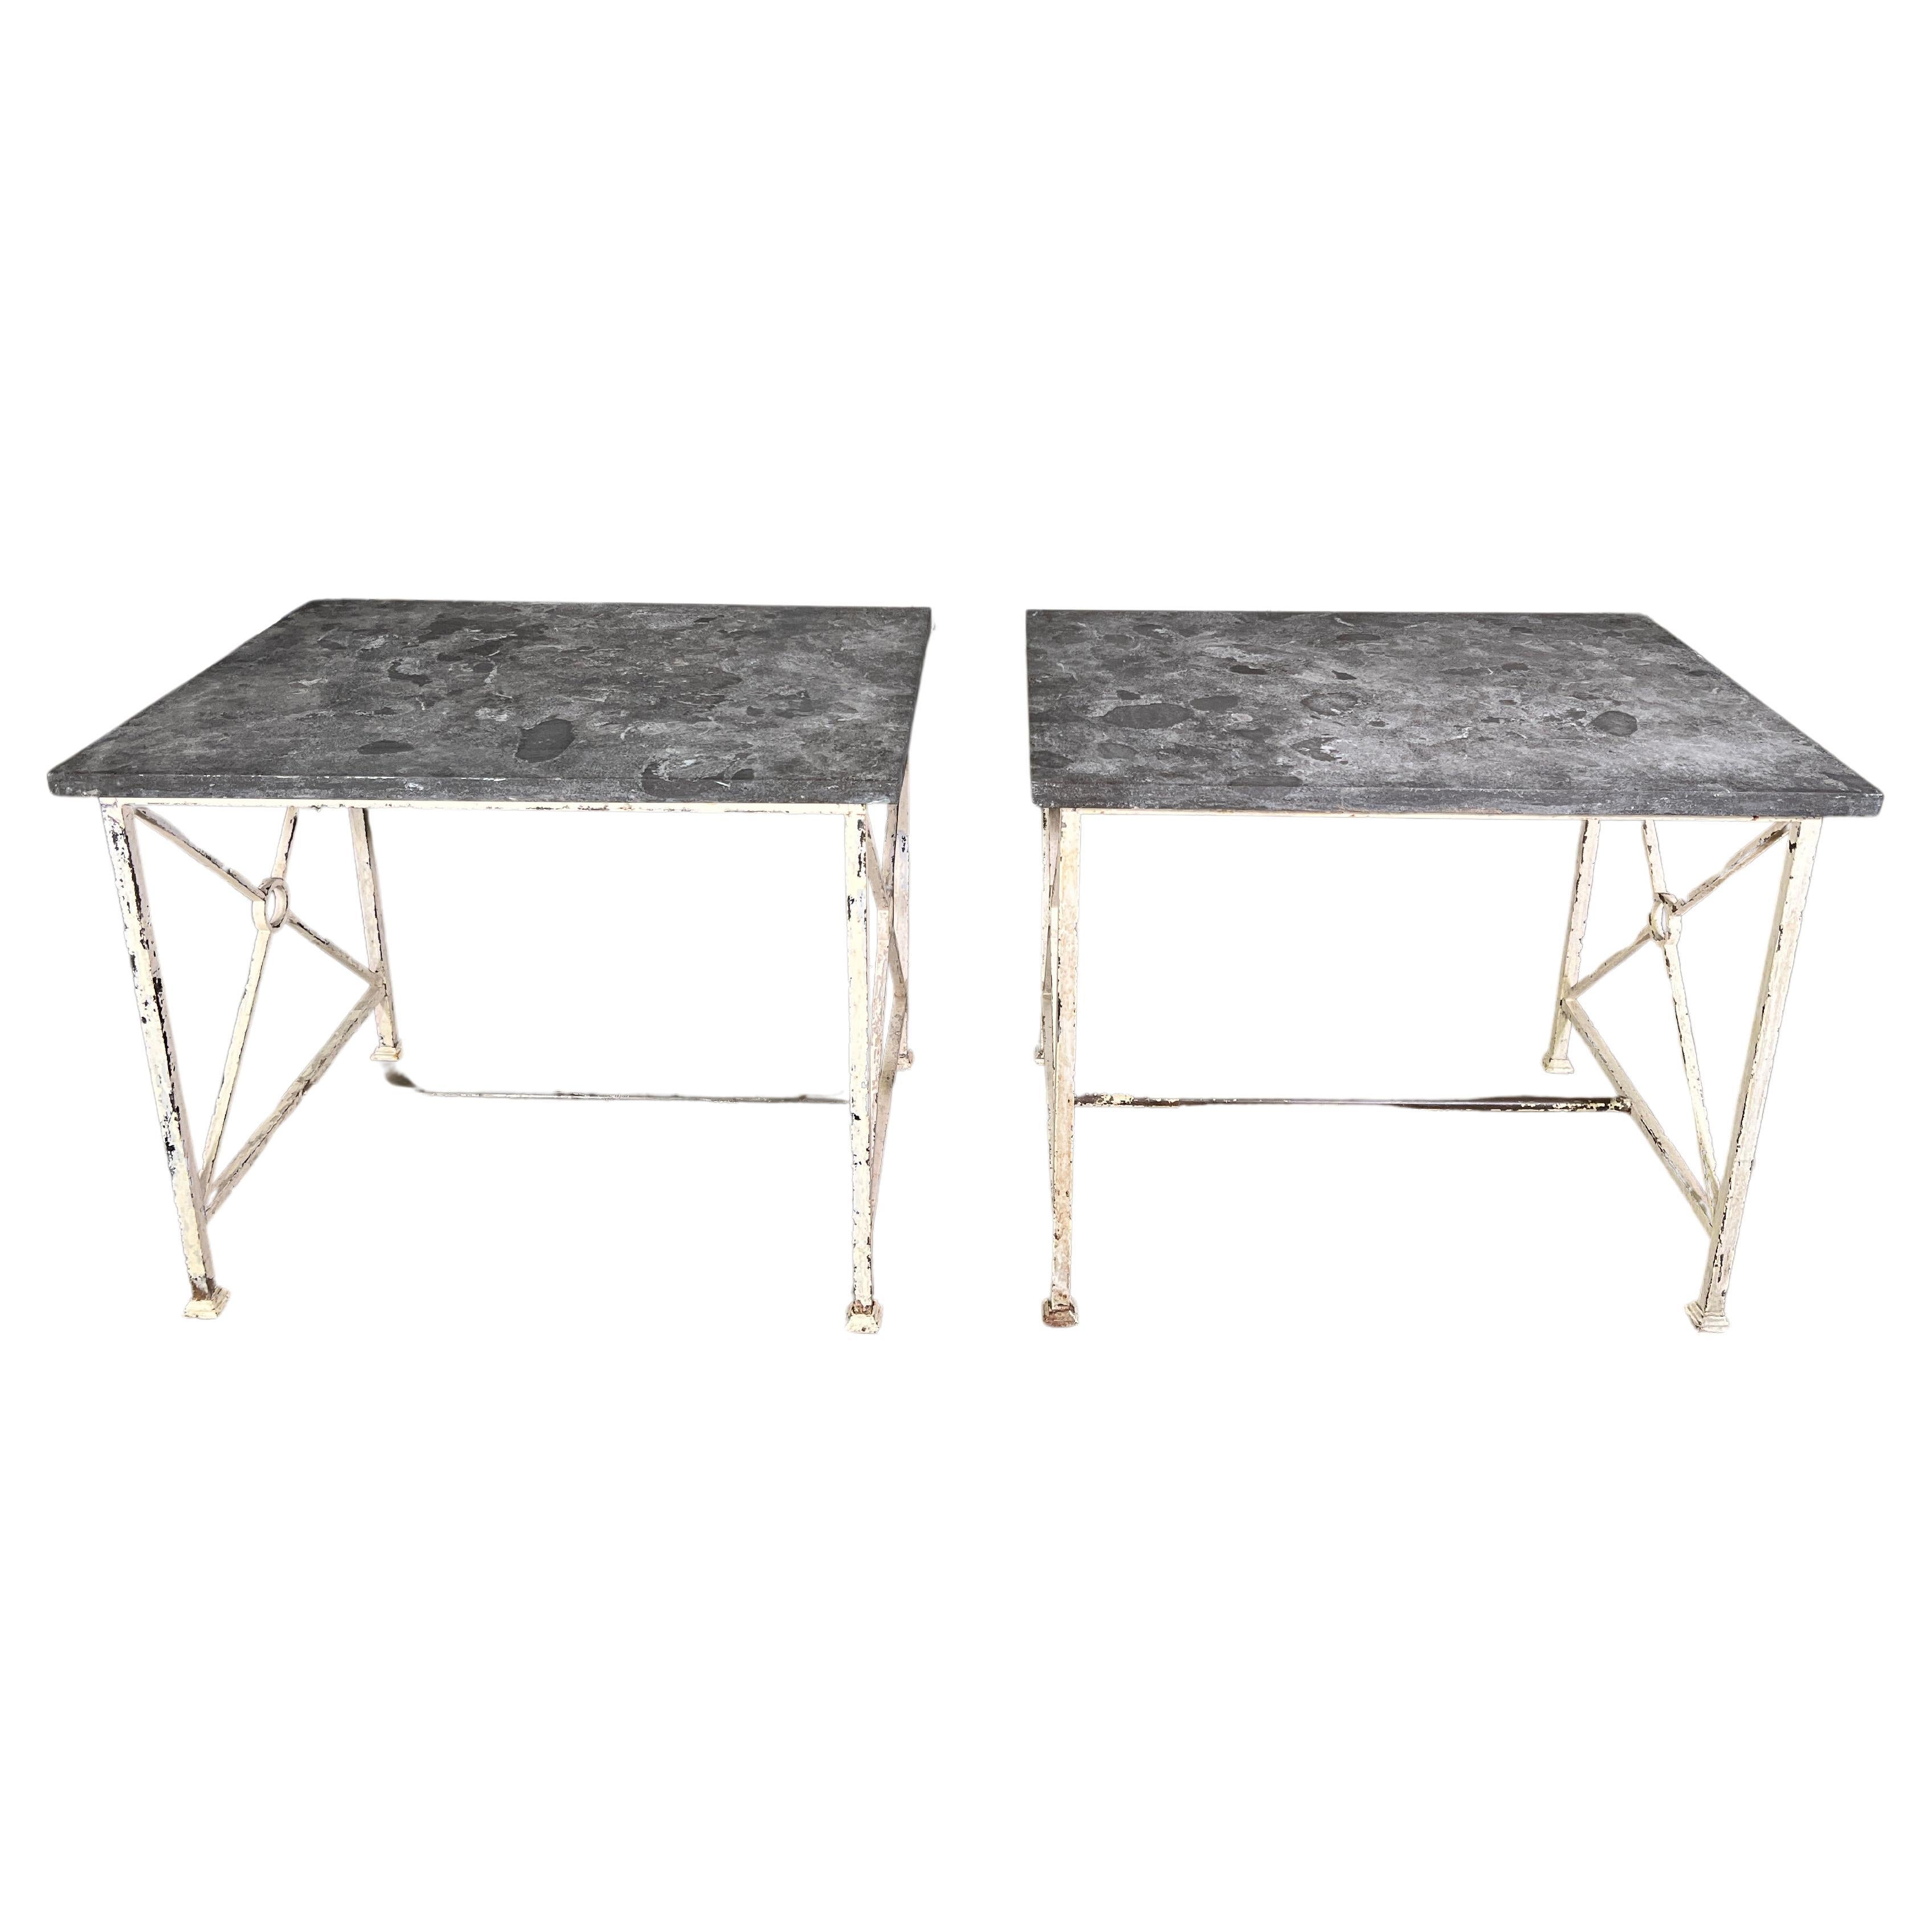 Circa 1950's French Directoire Tables with Slate Tops For Sale